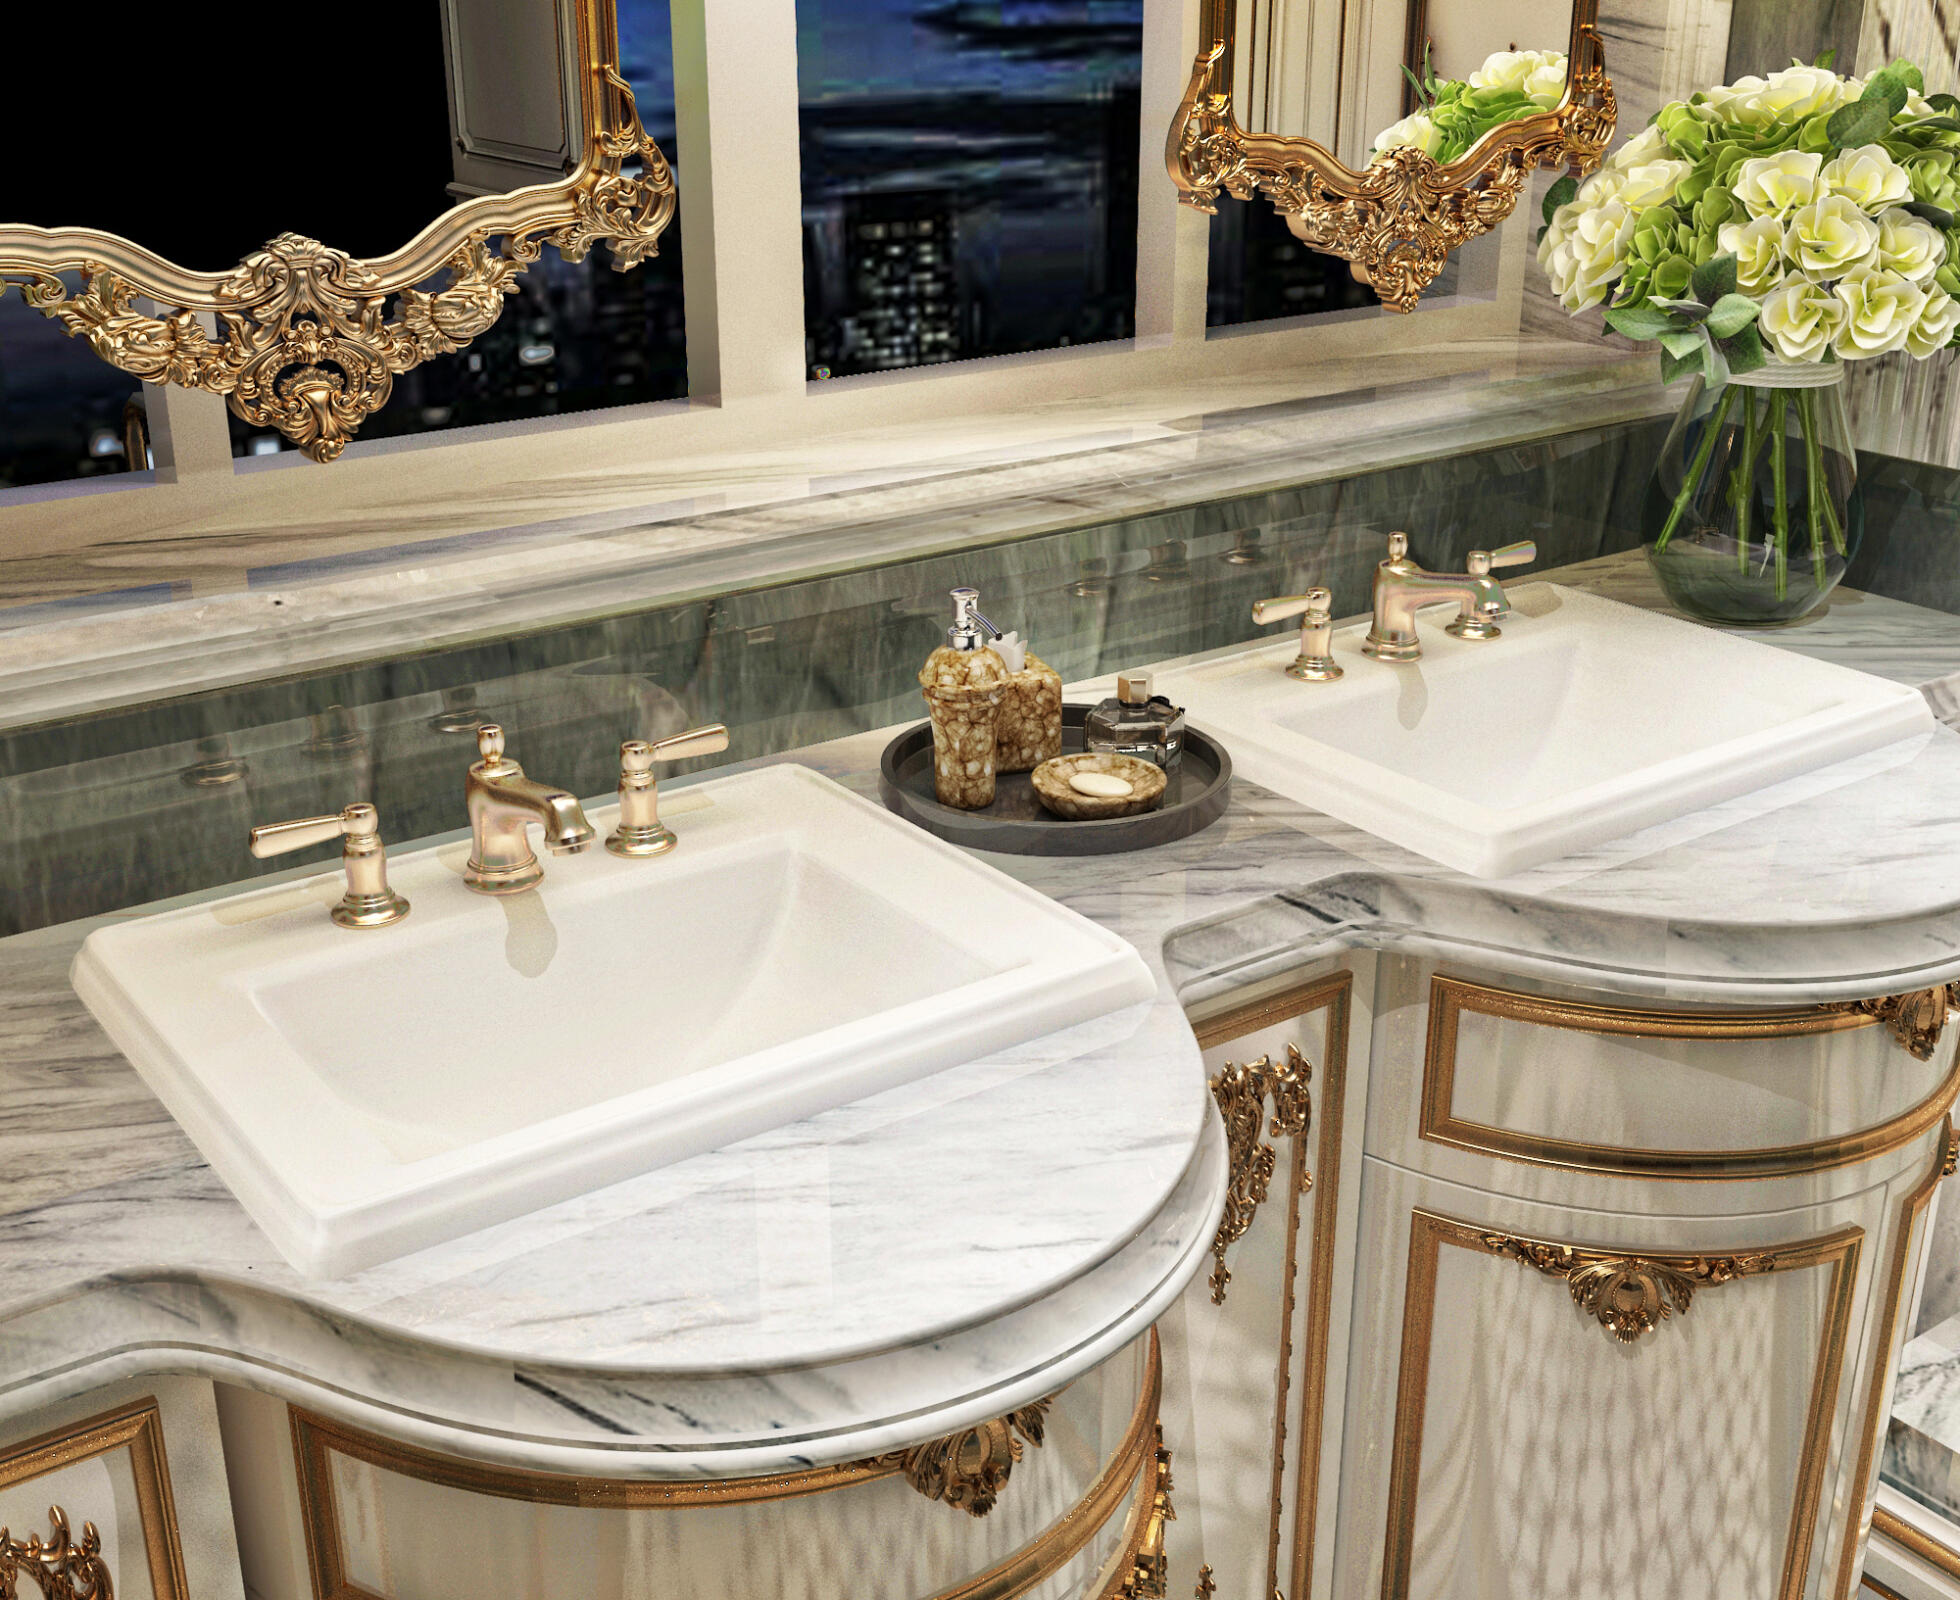 A stunning bathroom with two sinks and an ornate mirror.